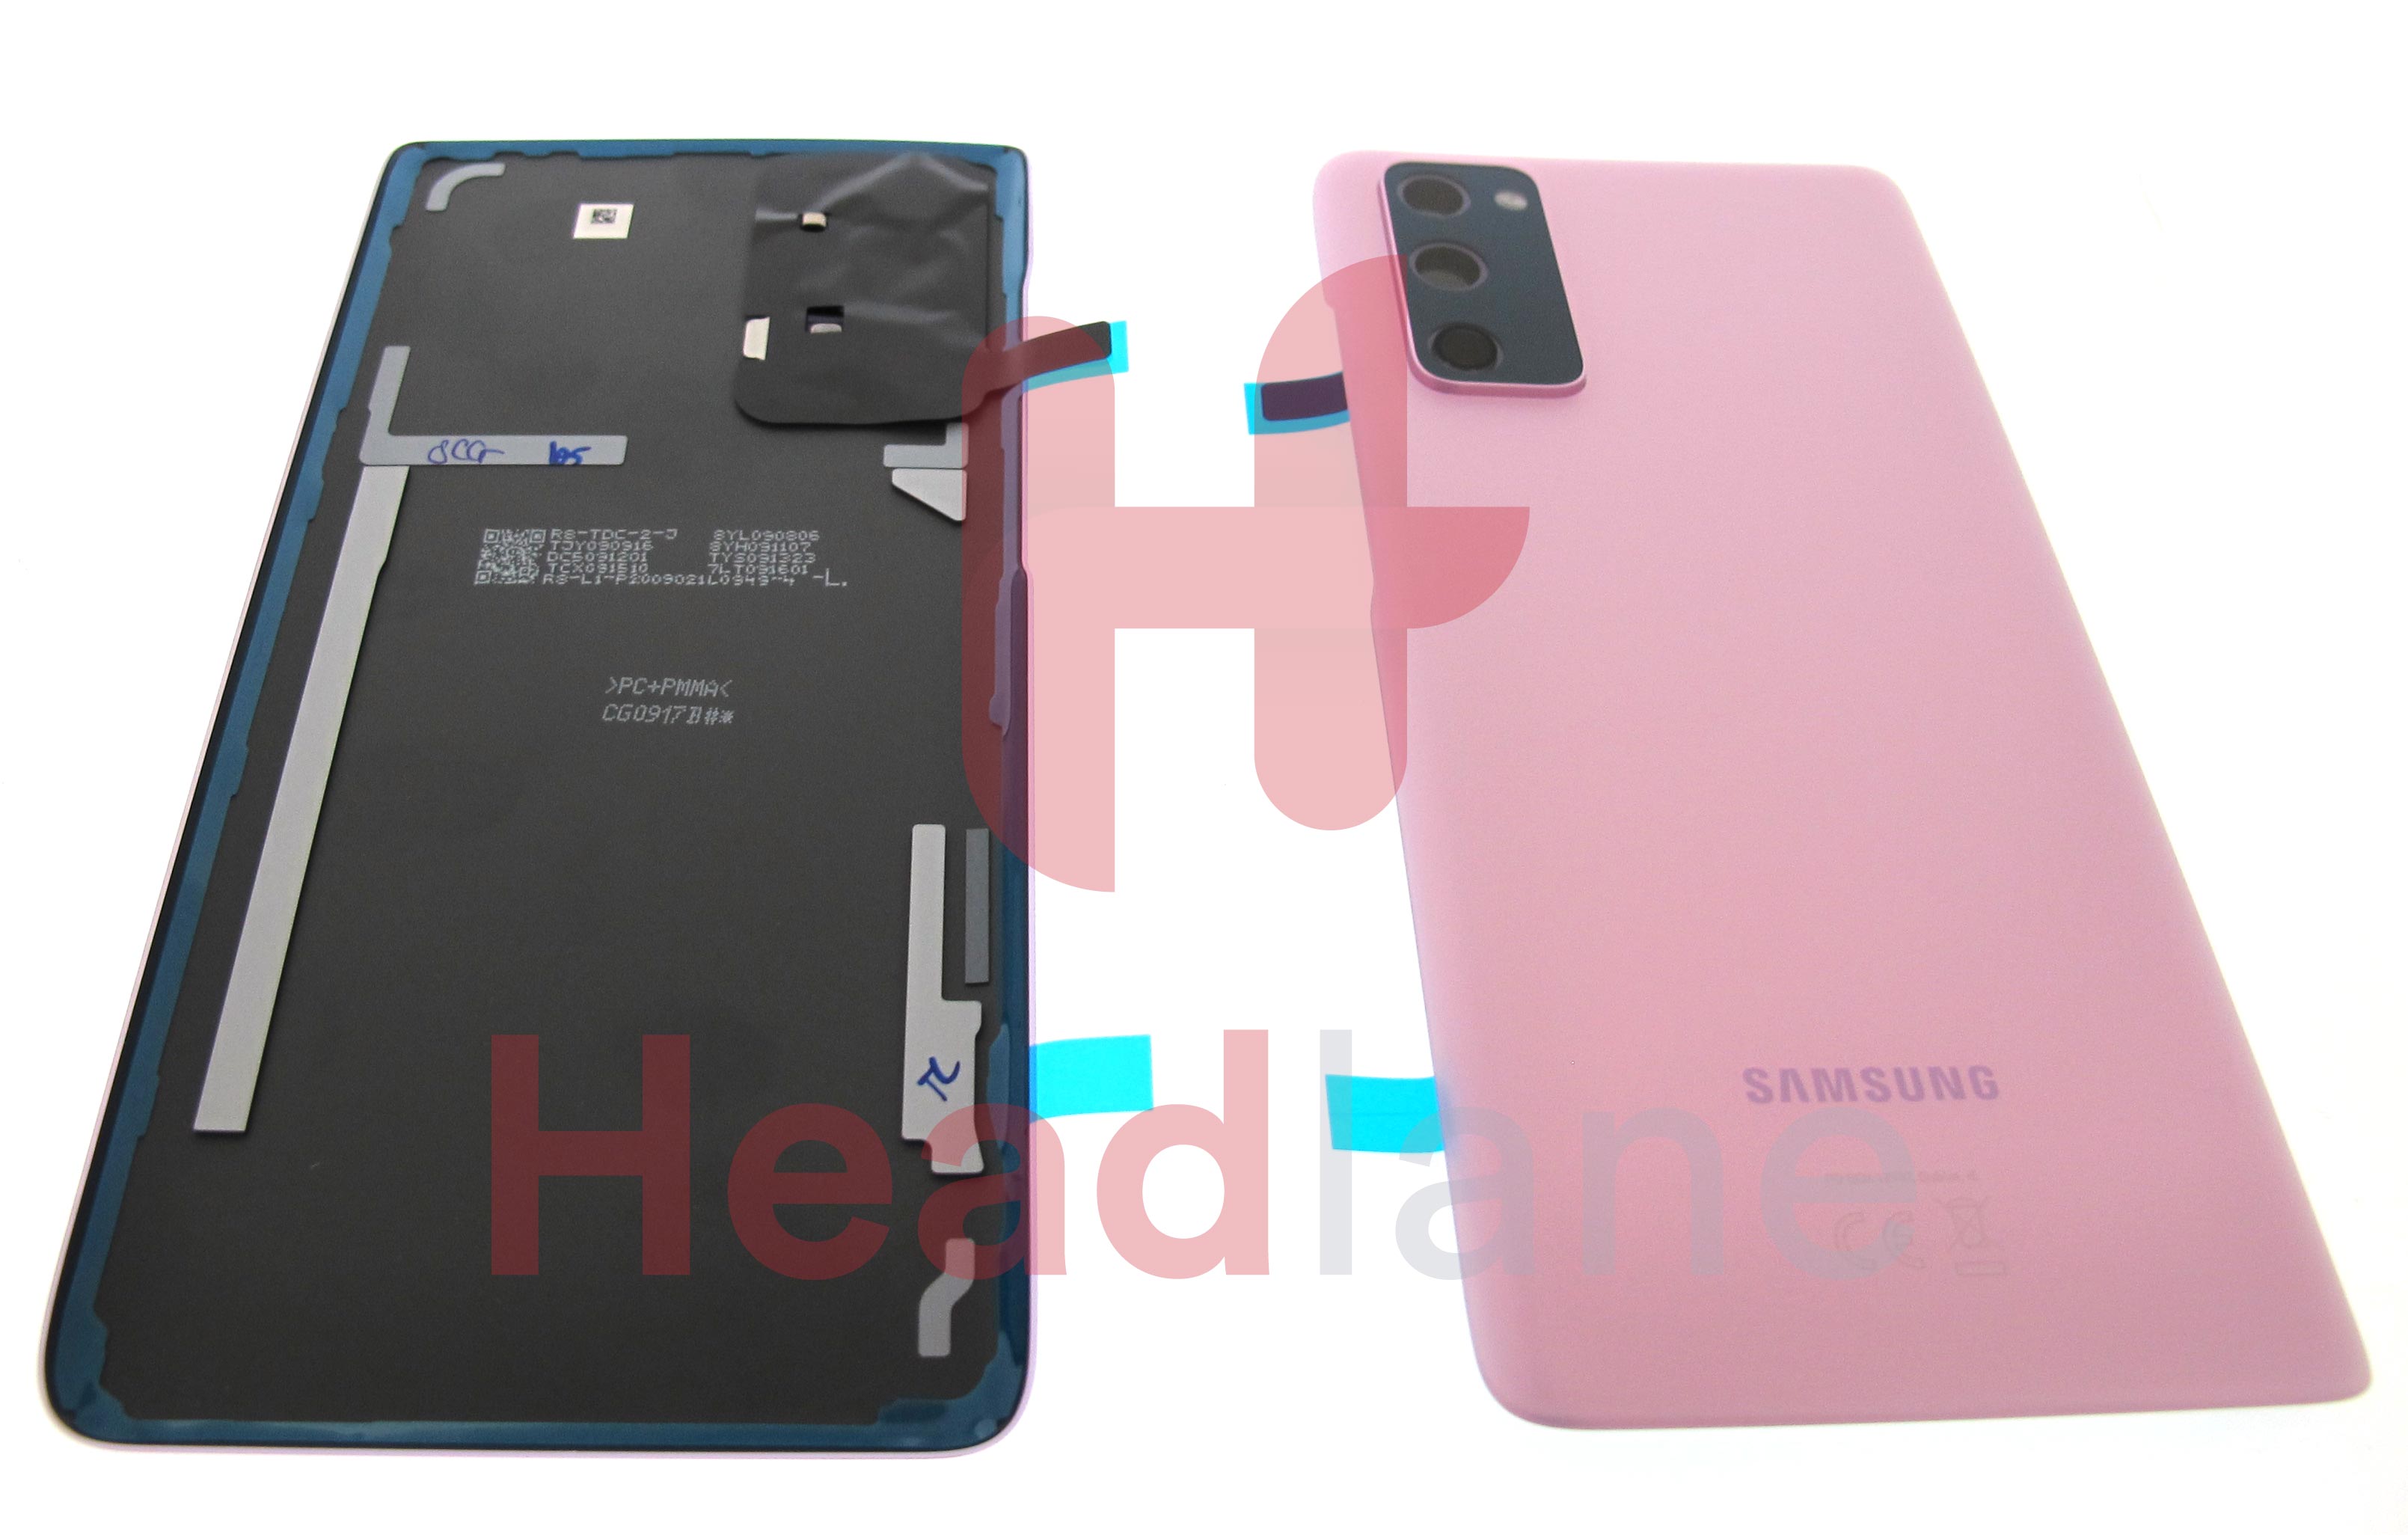 Samsung SM-G780 Galaxy S20 FE 4G Back / Battery Cover - Cloud Lavender